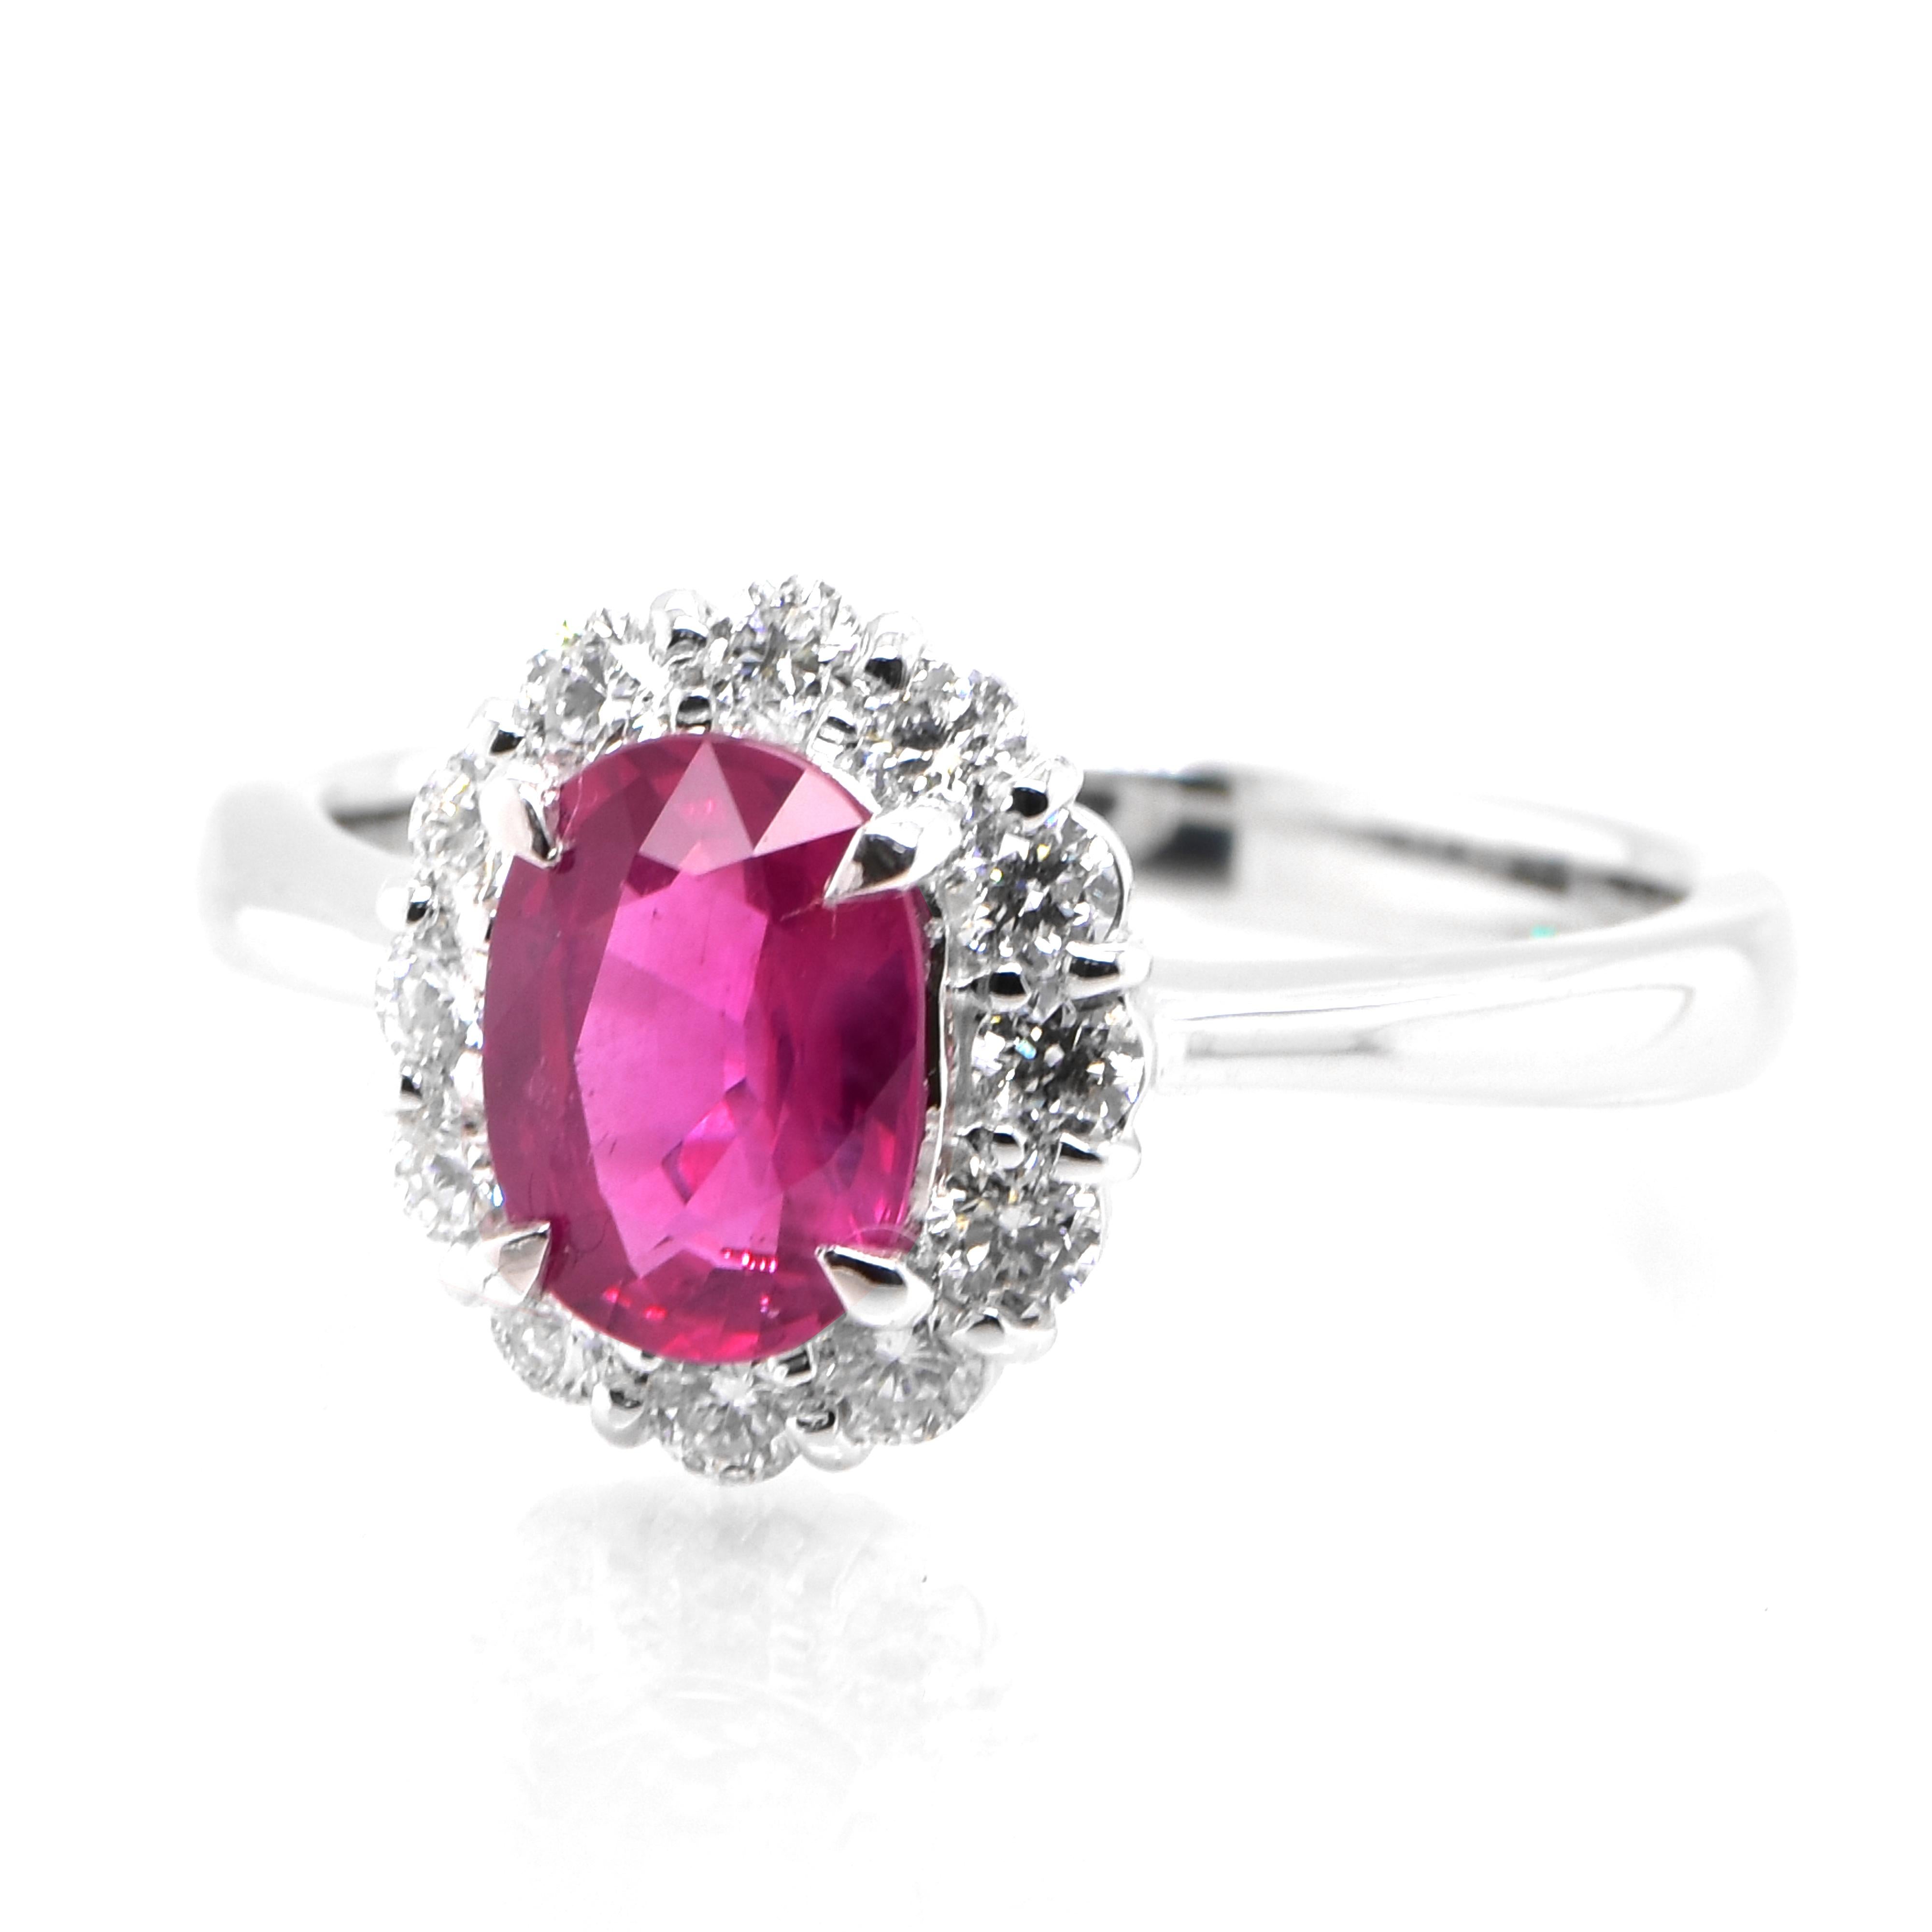 A beautiful Ring set in Platinum featuring a AIGS Certified 1.17 Carat Natural, Untreated (No Heat), Pigeon Blood Ruby and 0.41 Carat Diamonds. Rubies are referred to as 